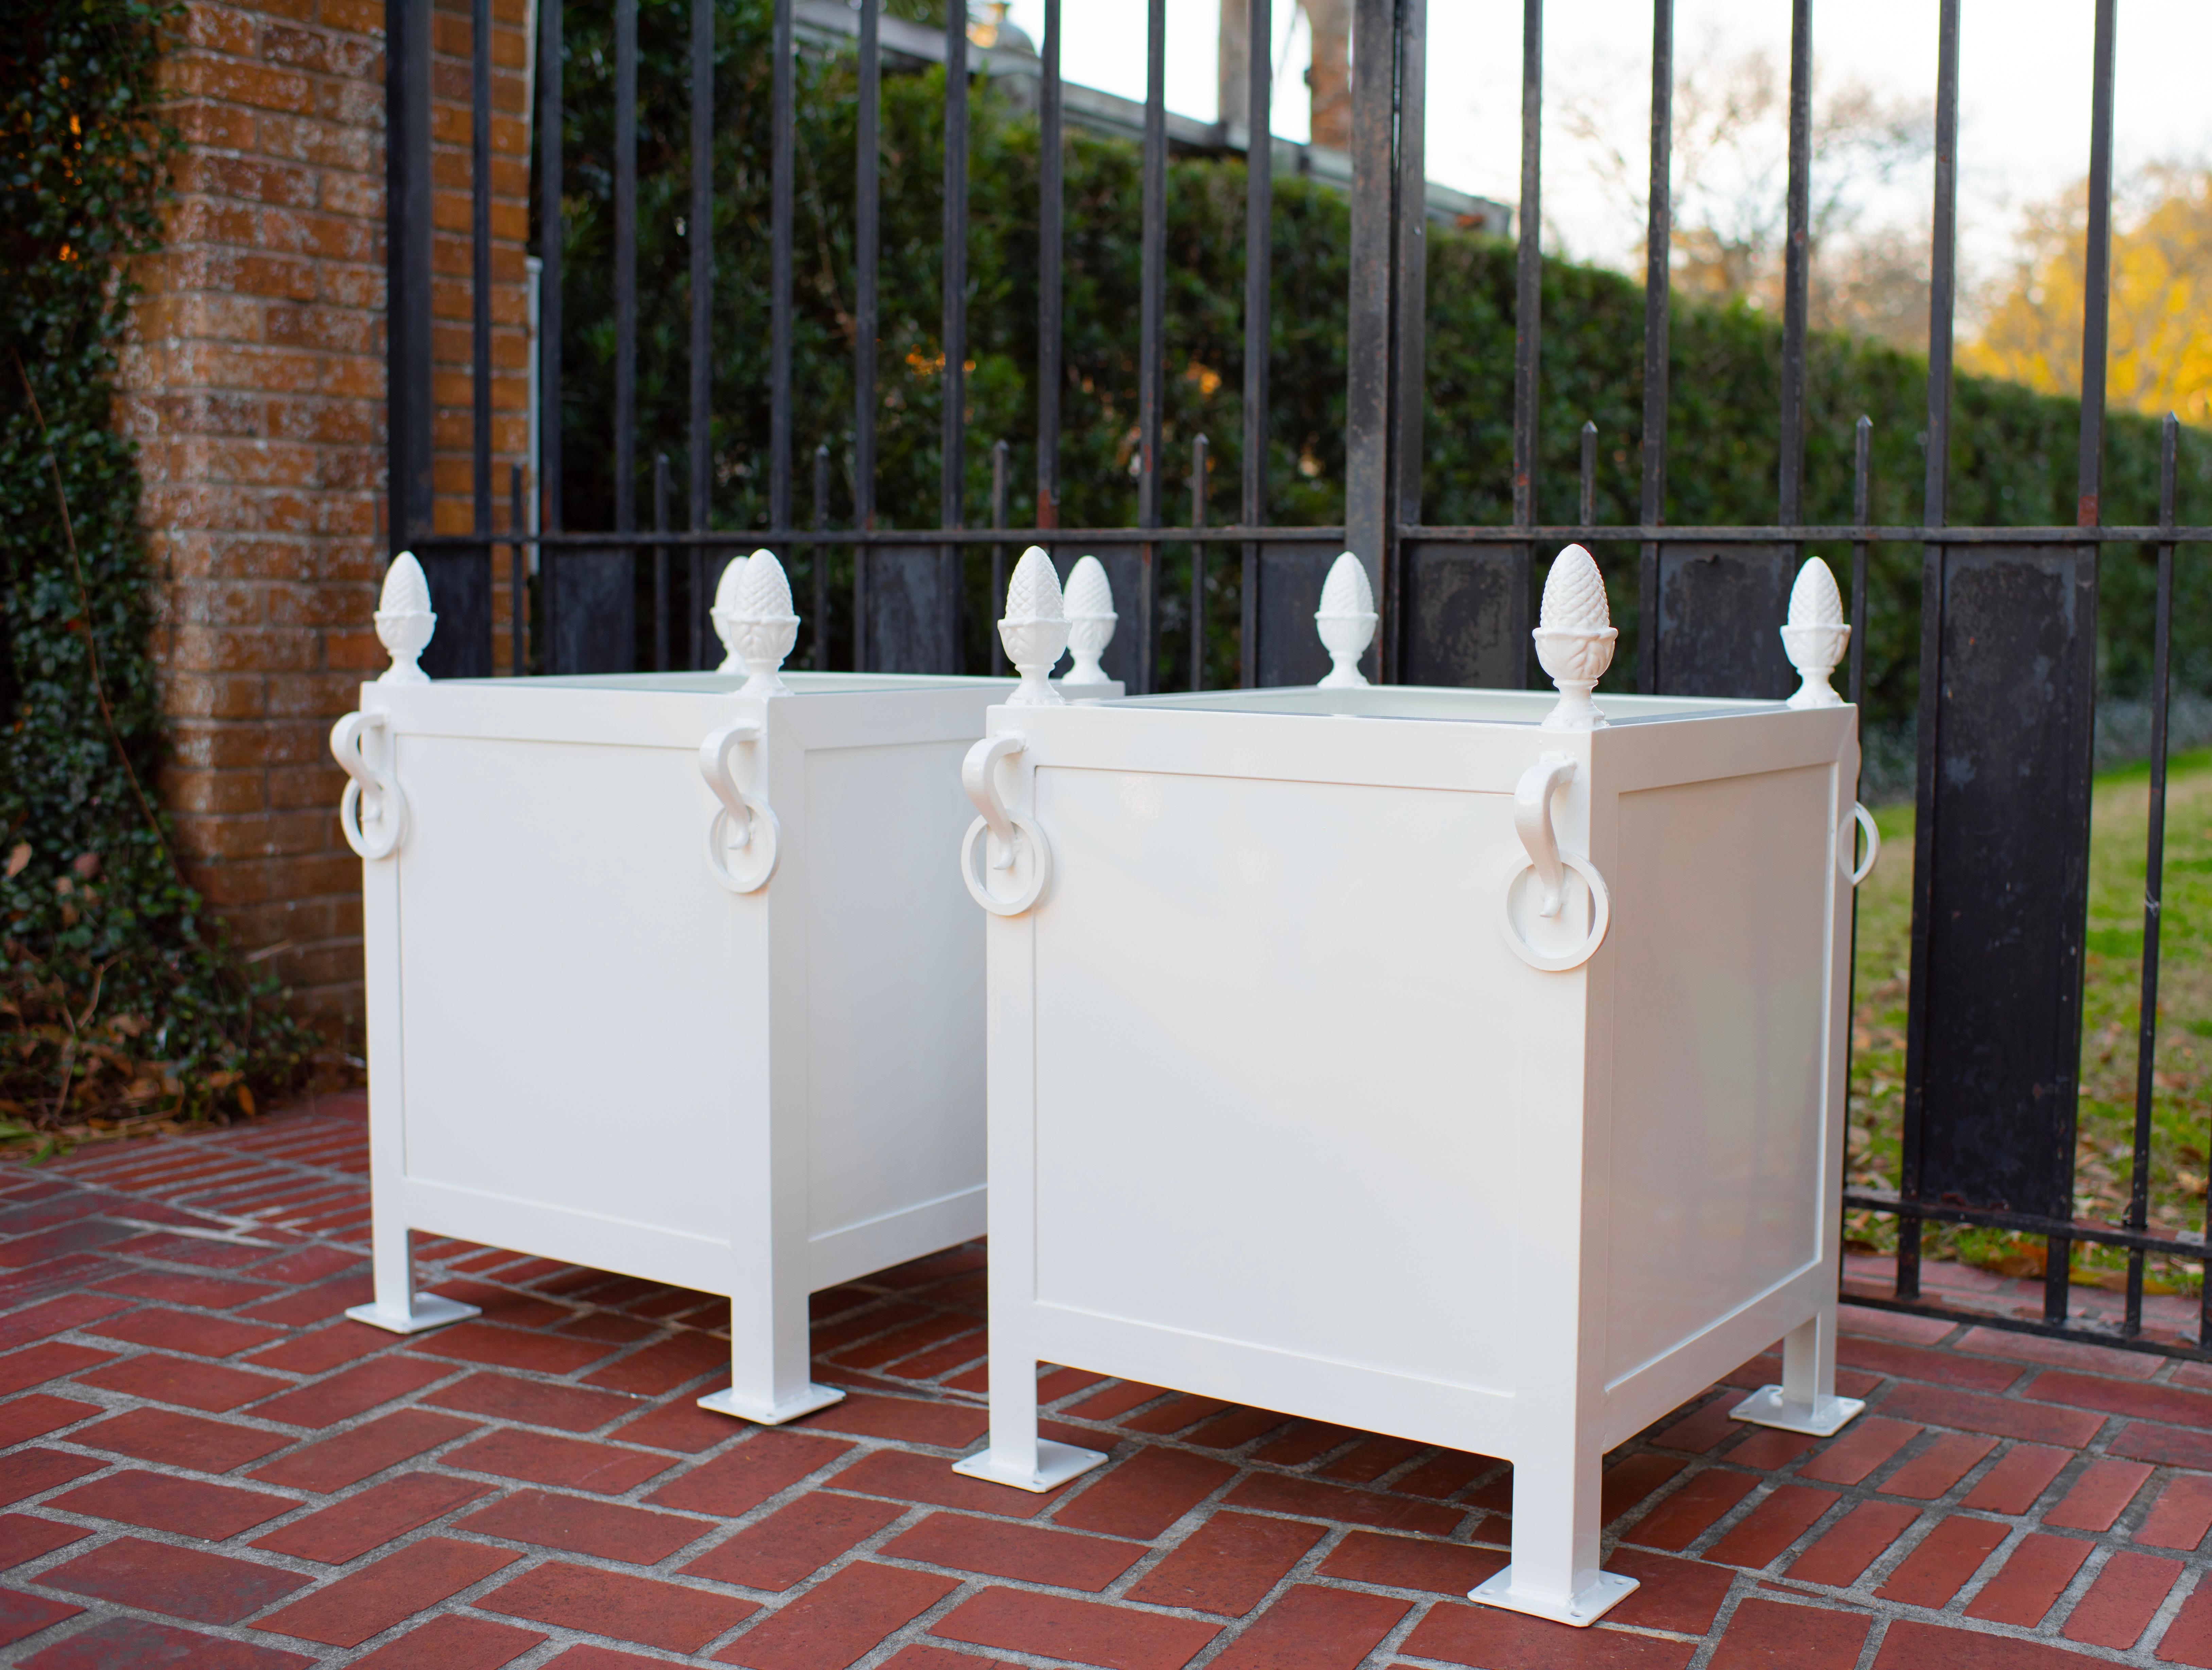 Pair of Large Square French Style steel and cast iron orangerie planter boxes in lacquered white. Handcrafted in New Orleans by local metalsmiths using 14 gauge steel and cast iron, using centuries’ old French techniques. Each planter is raised to